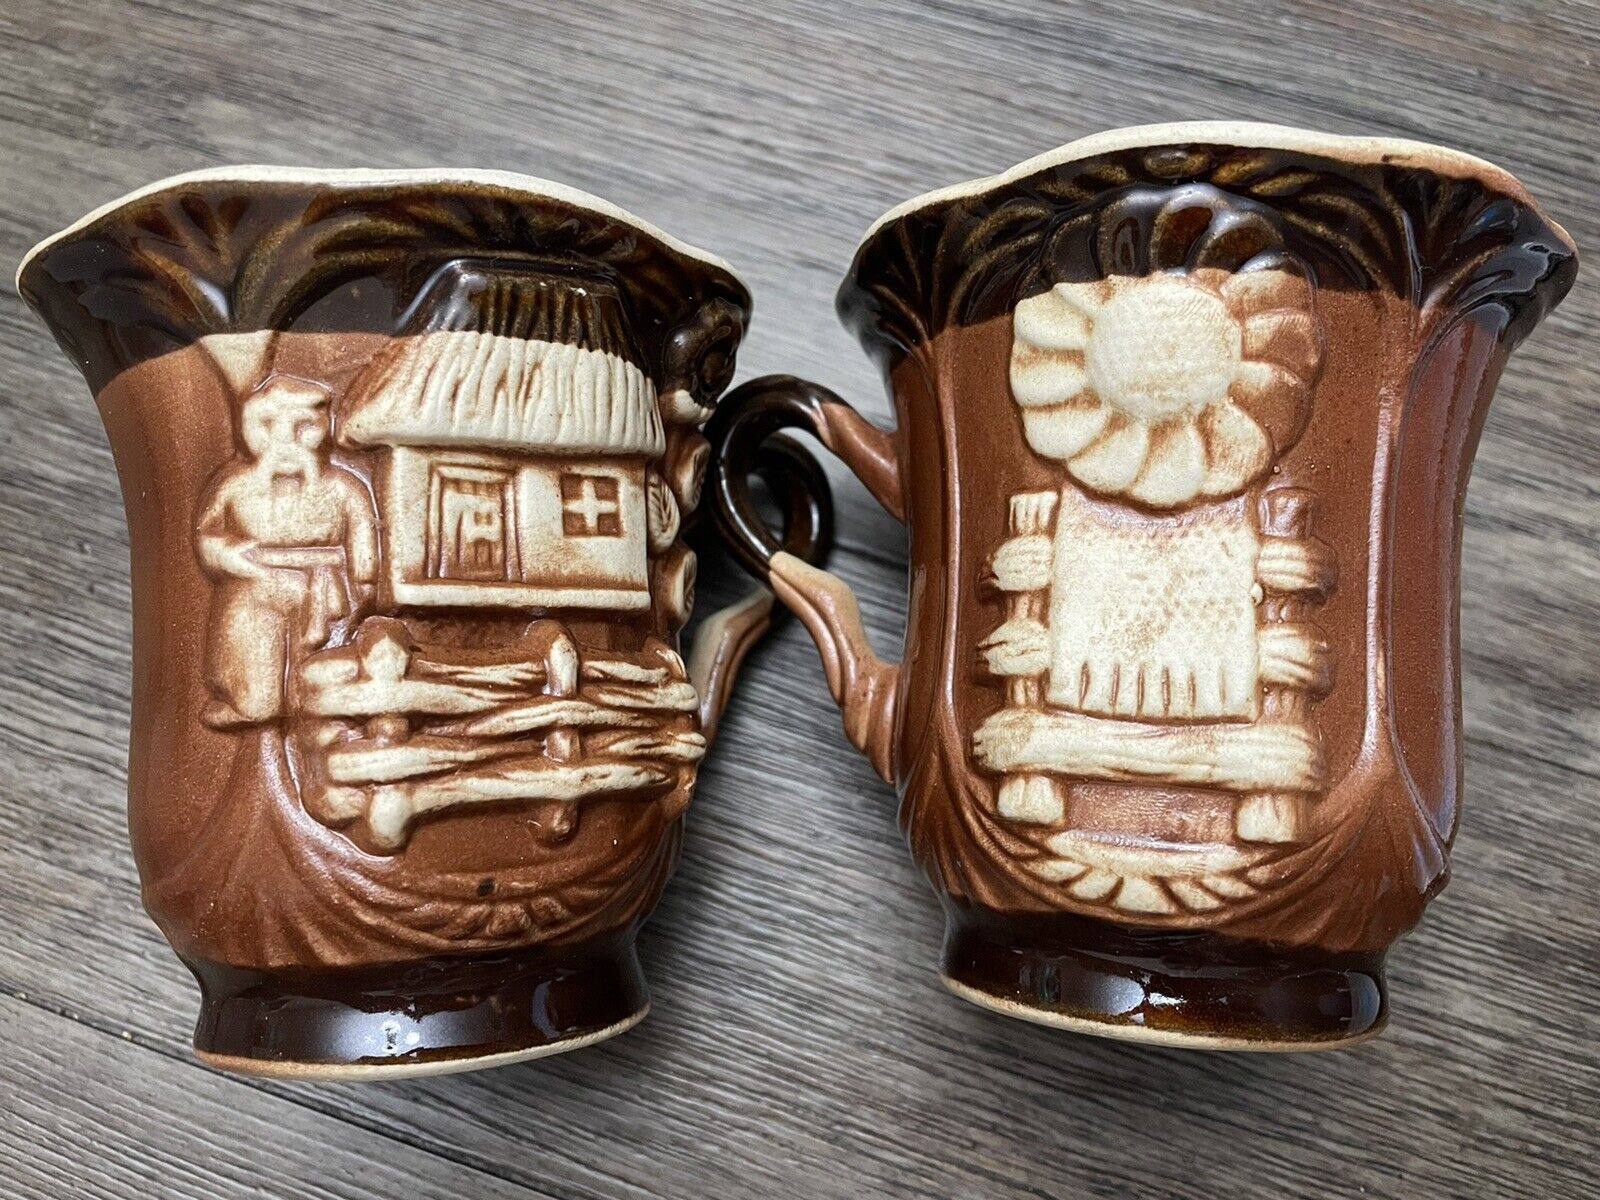 Japanese Artisan Mug Set Of 2 Hand Crafted Unique Vintage Coffee Cup Set